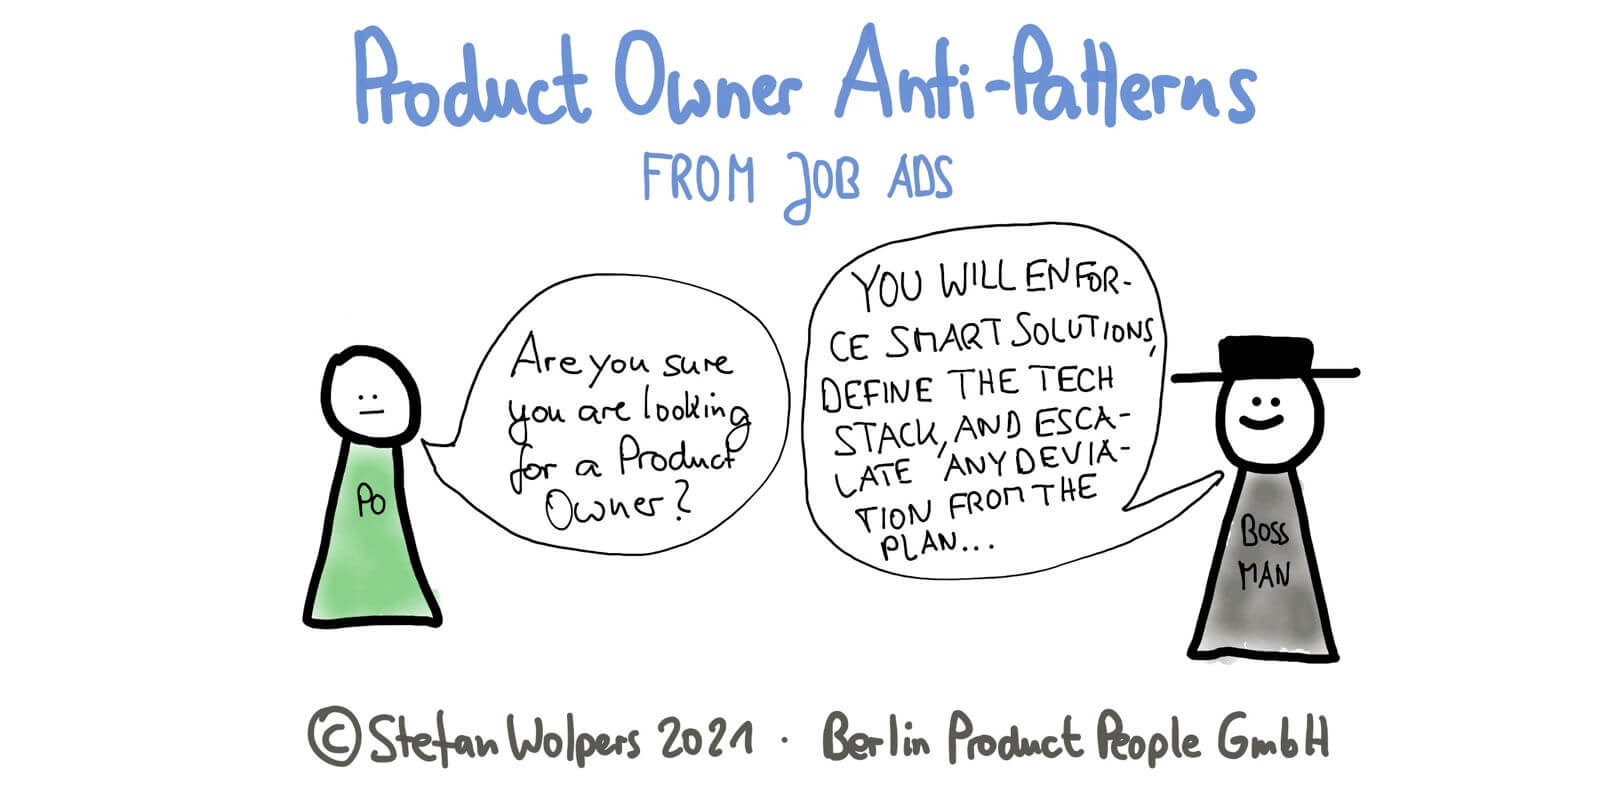 23 Product Owner Anti-Patterns from Job Ads: The Snitch, the Whip, the Bookkeeper, the Six Sigma Black Belt™ — Berlin Product People GmbH